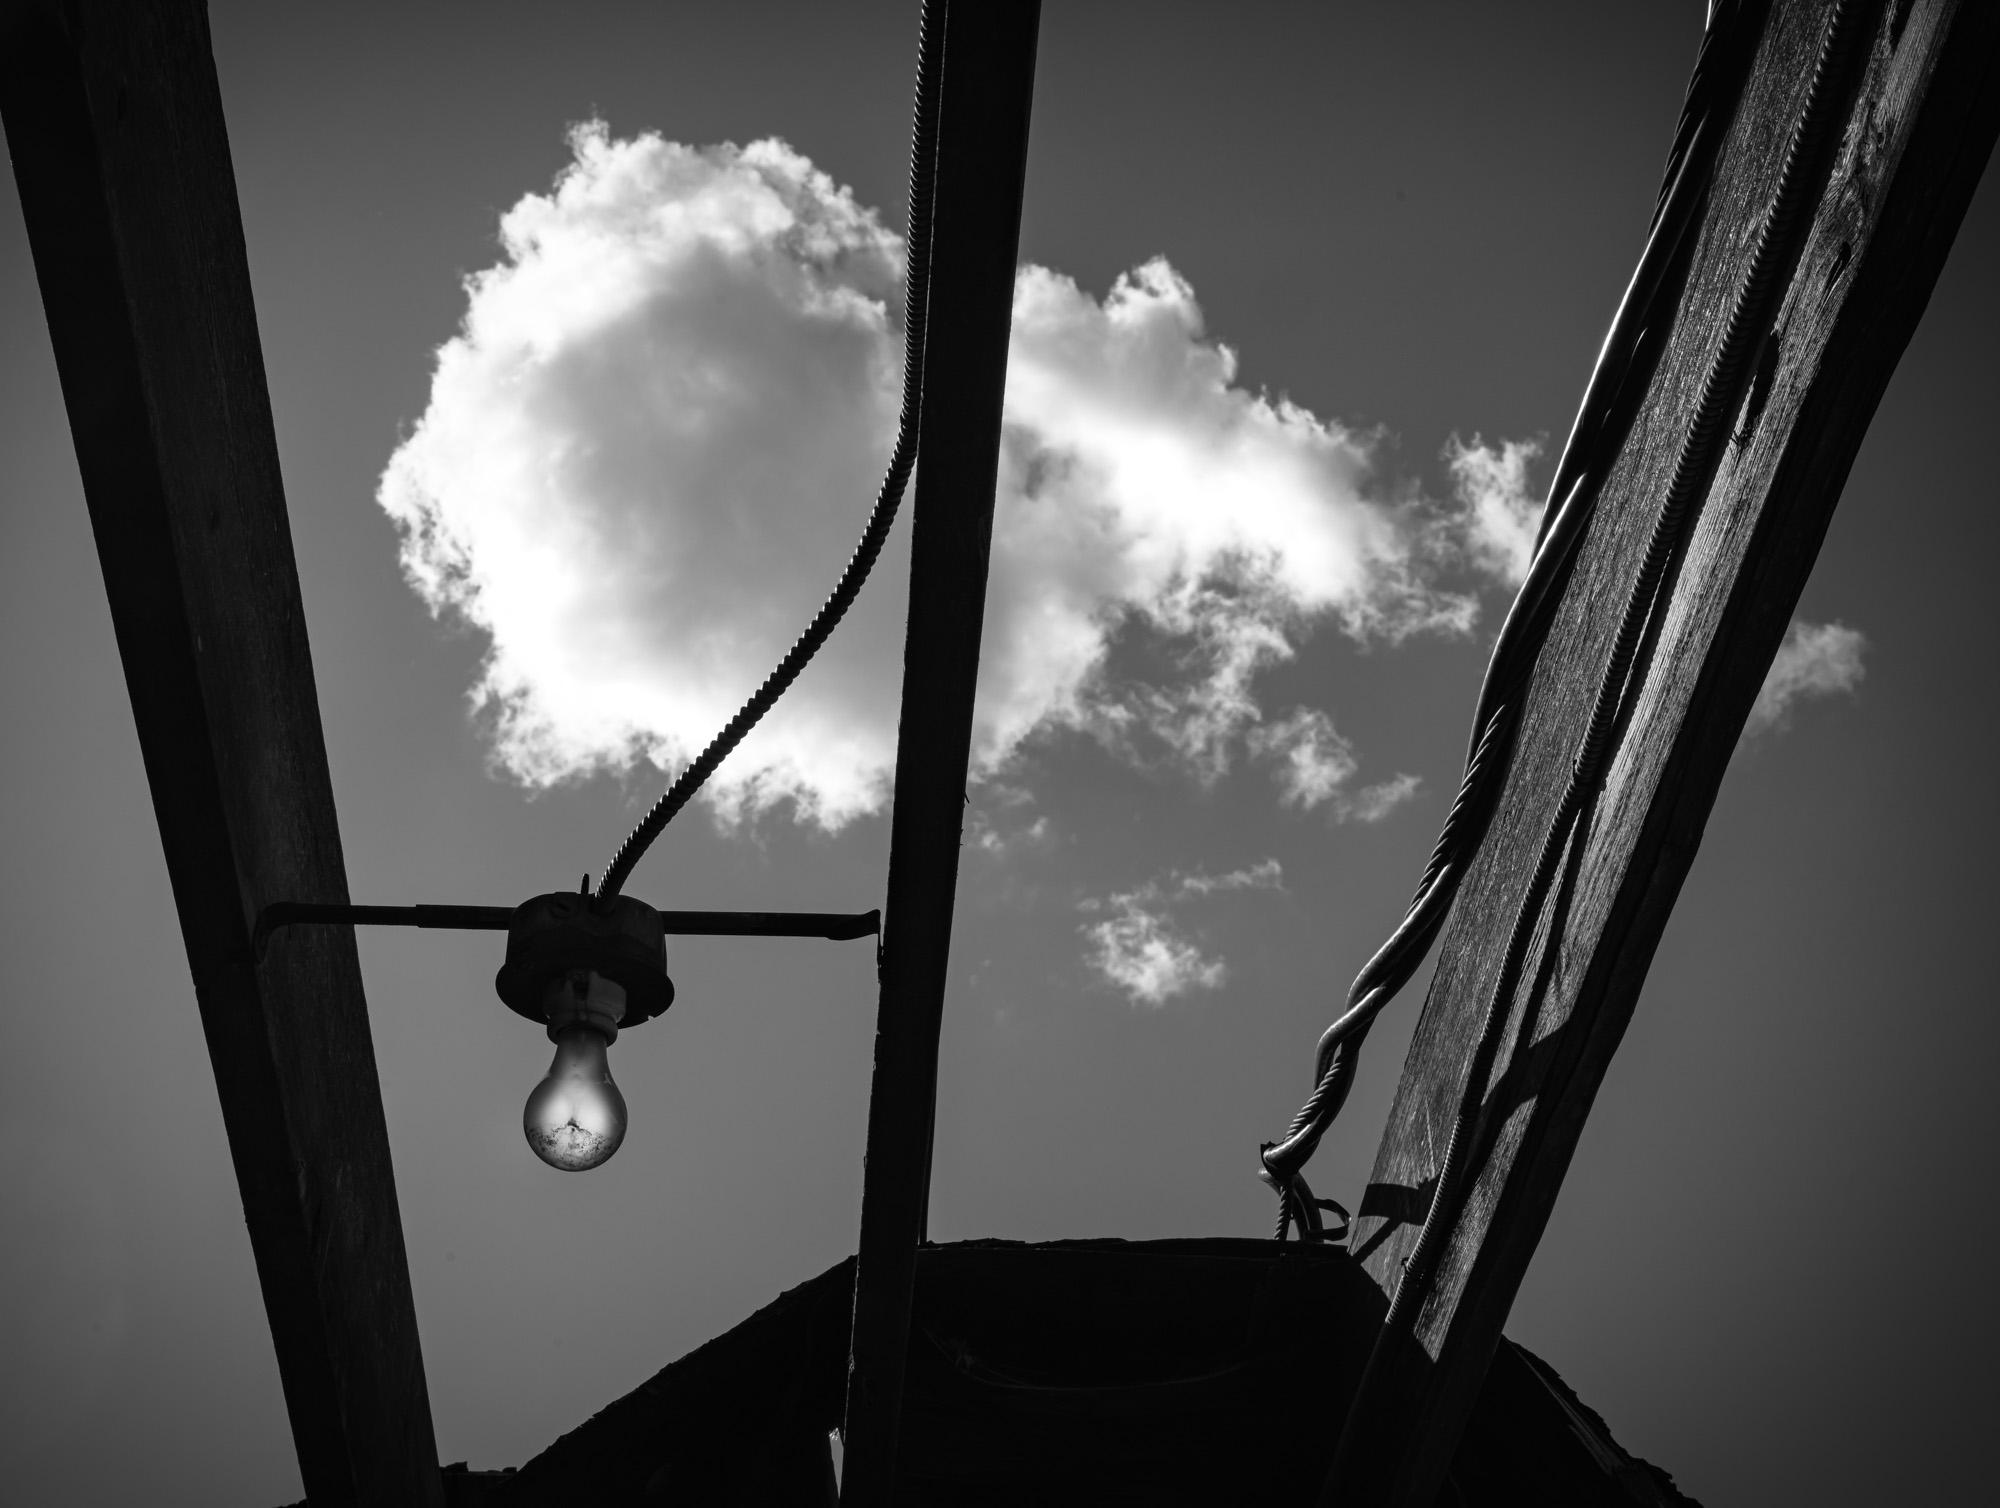 Limited Edition Black and White Photograph, Bulb and Cloud 2021. I enjoy exploring abandoned buildings and this one was ripe for a Sunday afternoon with a perfect cloud to get the right composition.

About:
Lewis’ artistic practice often explores